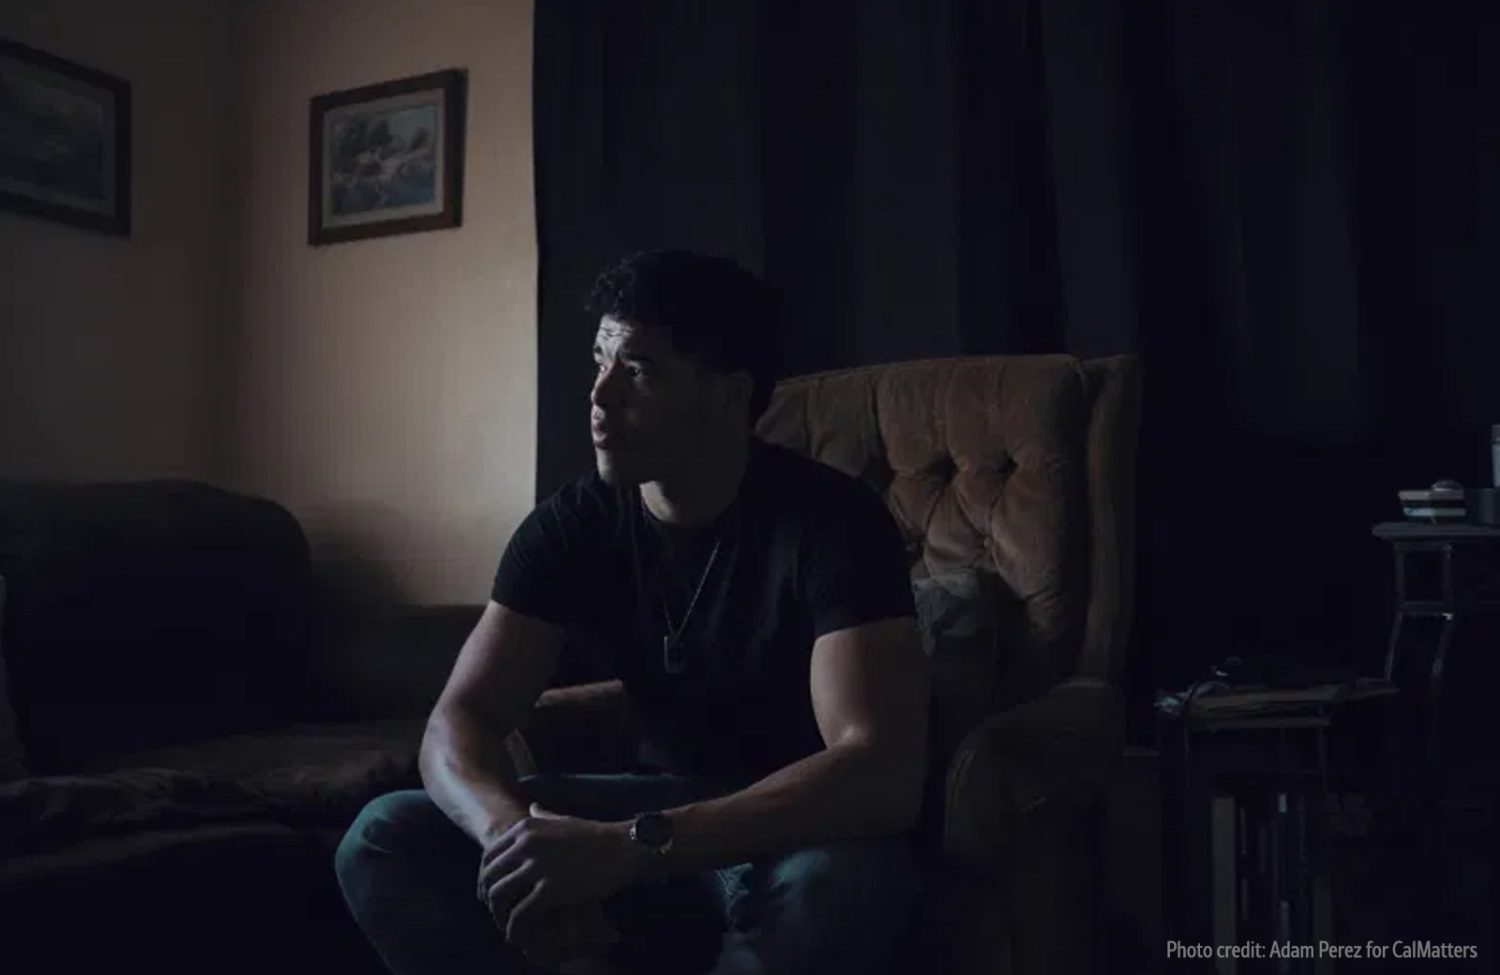 young man sitting on couch in a dark room